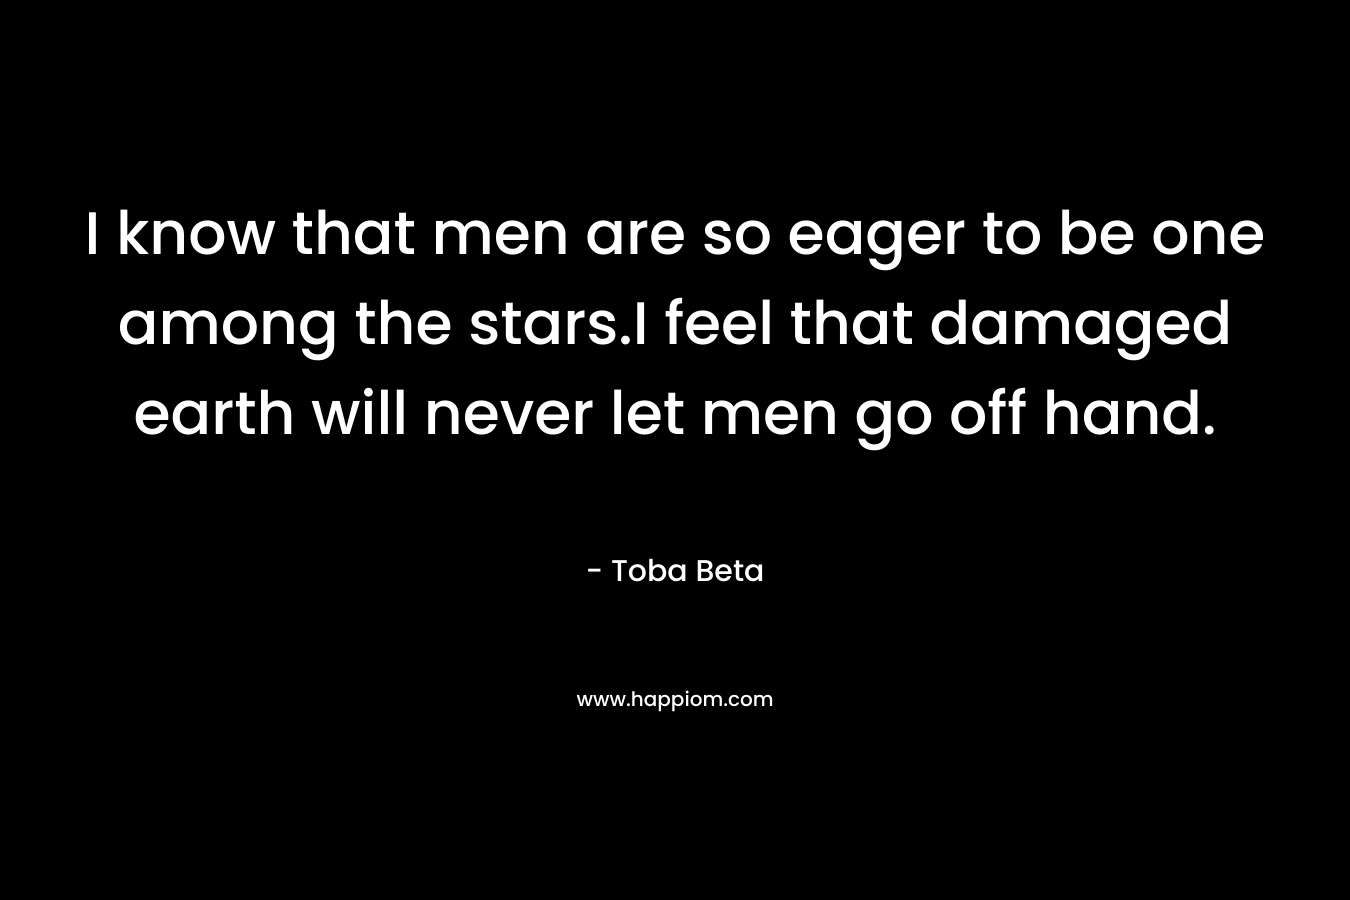 I know that men are so eager to be one among the stars.I feel that damaged earth will never let men go off hand.